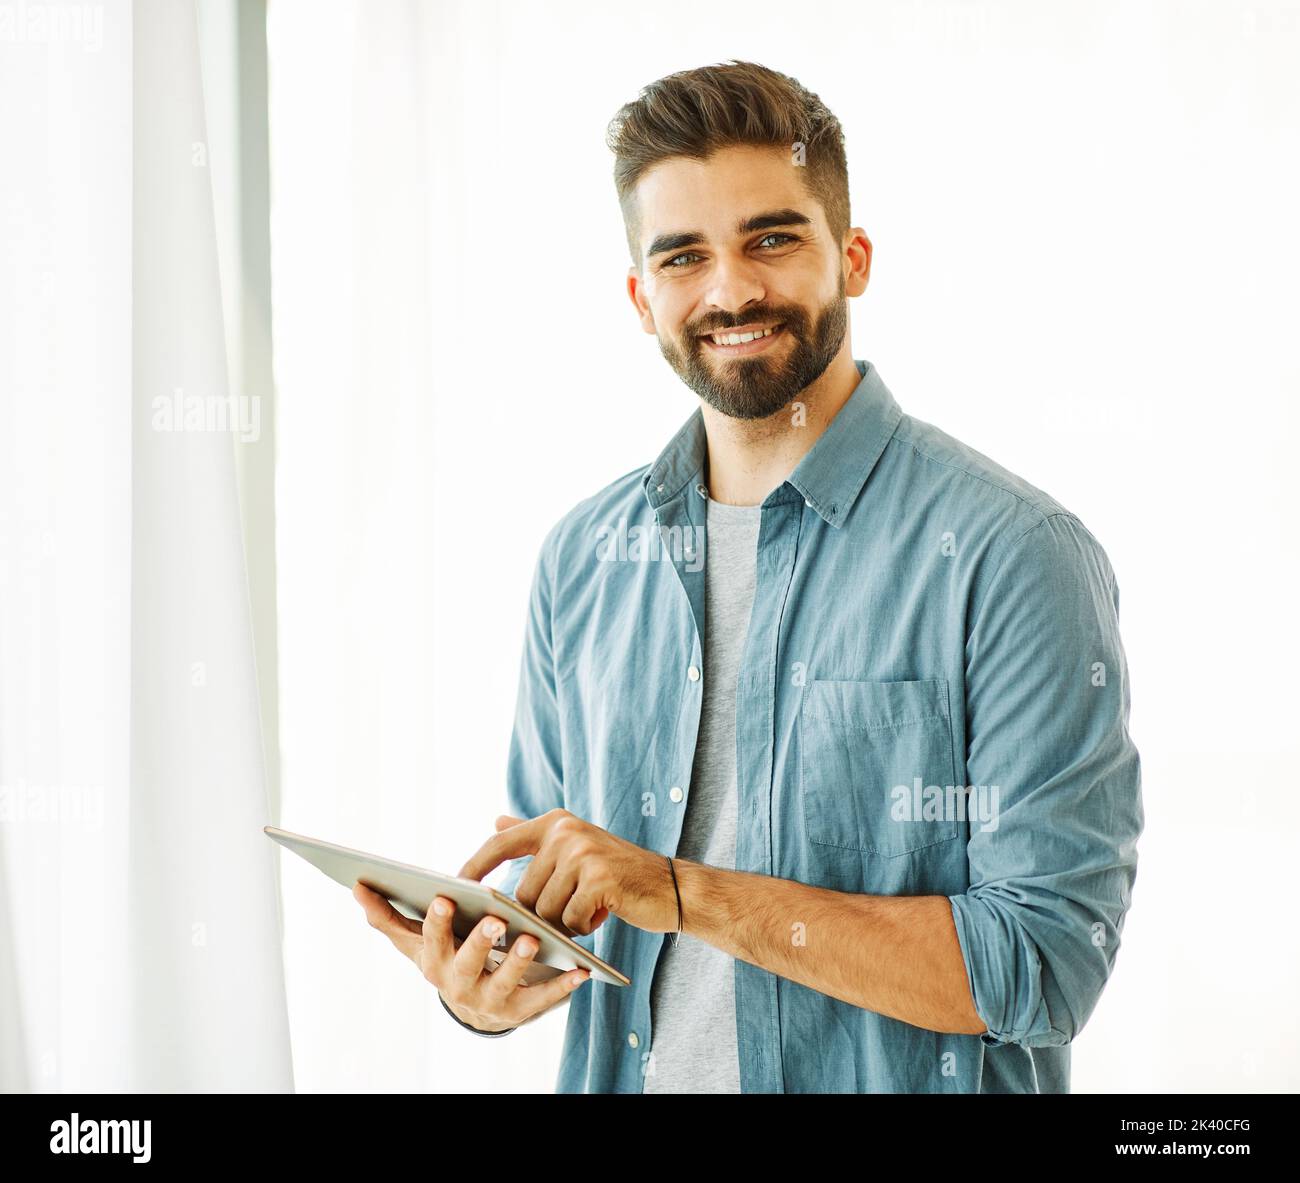 portrait man tablet technology male computer young happy lifestyle handsome smiling digital internet online Stock Photo